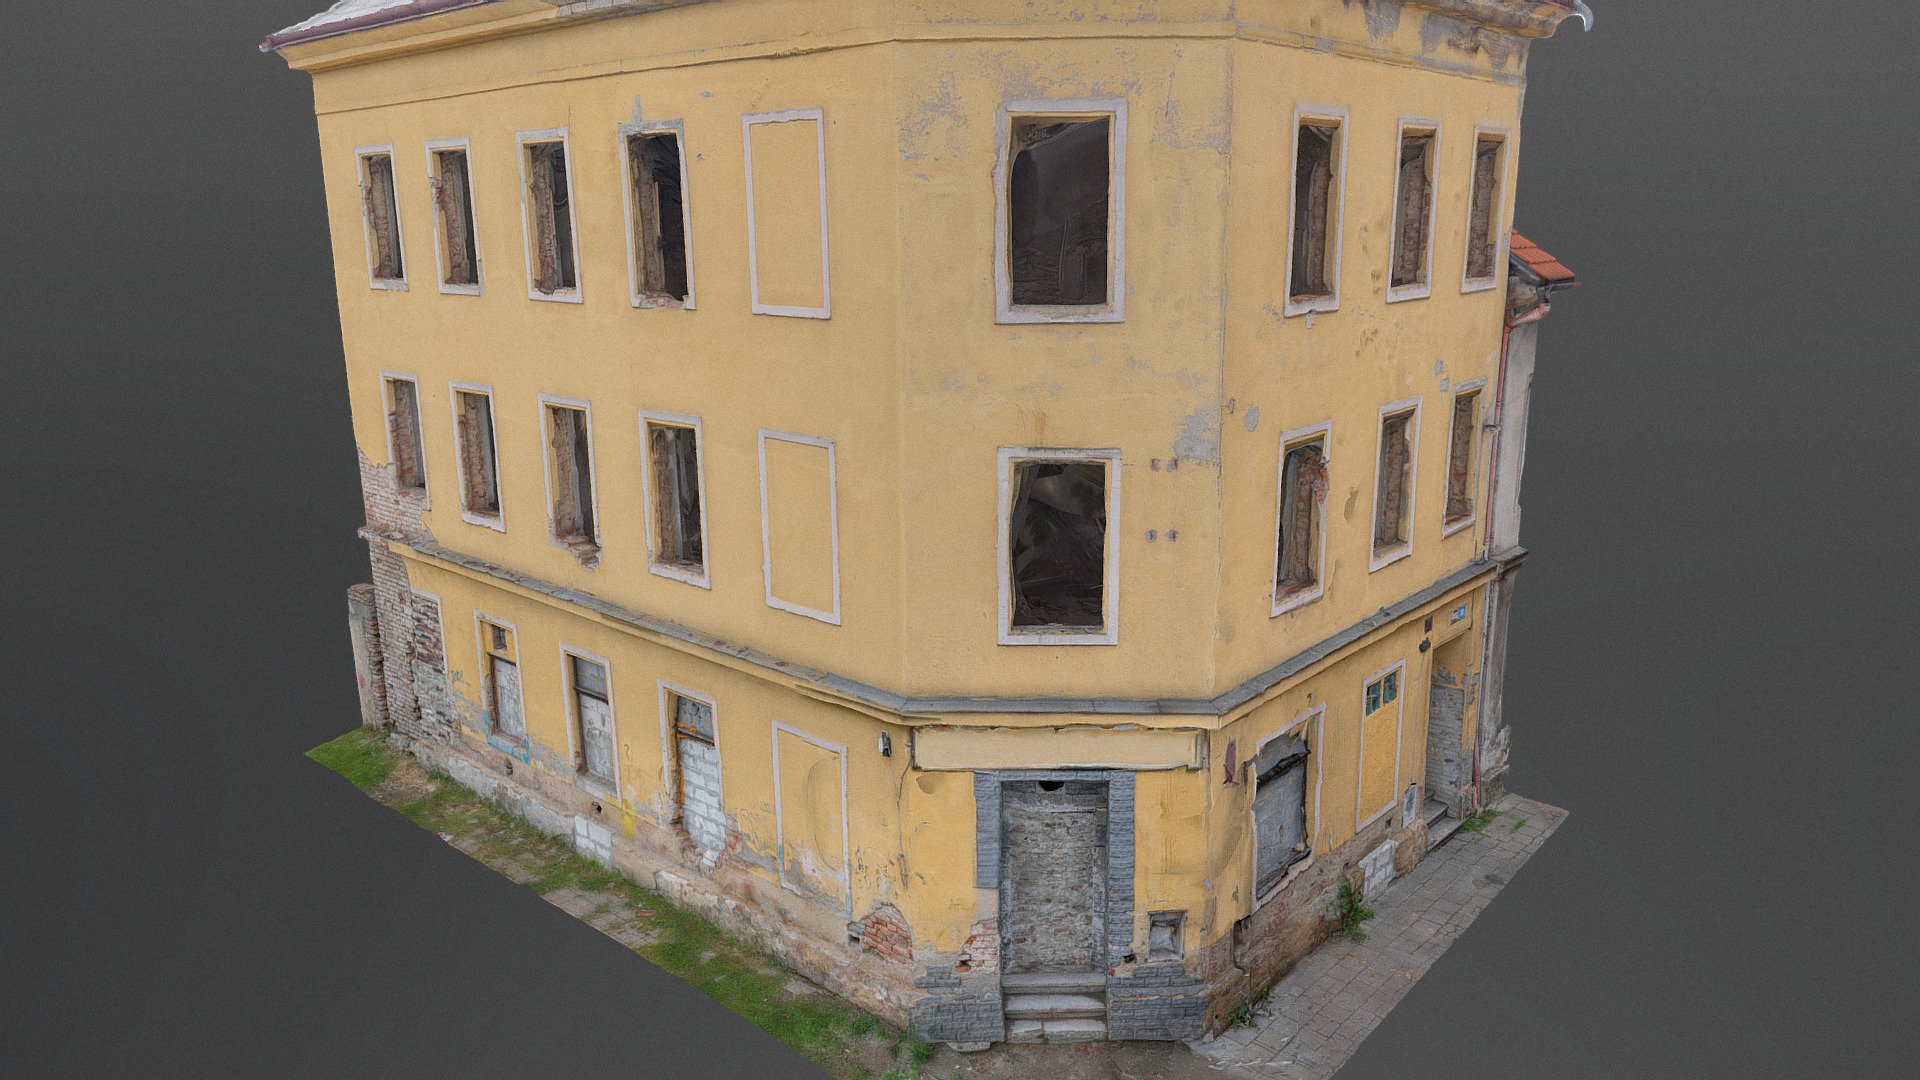 Historic old Early 20th century  yellow corner brick ruined derelict abandoned apartment house building facade scene 3D model street line

photogrammetry scan (350x36MP), 5x8K texture +HD normals (as additional .zip) - contact me for source photos or re-exports - Yellow corner house ruin - Buy Royalty Free 3D model by matousekfoto 3d model